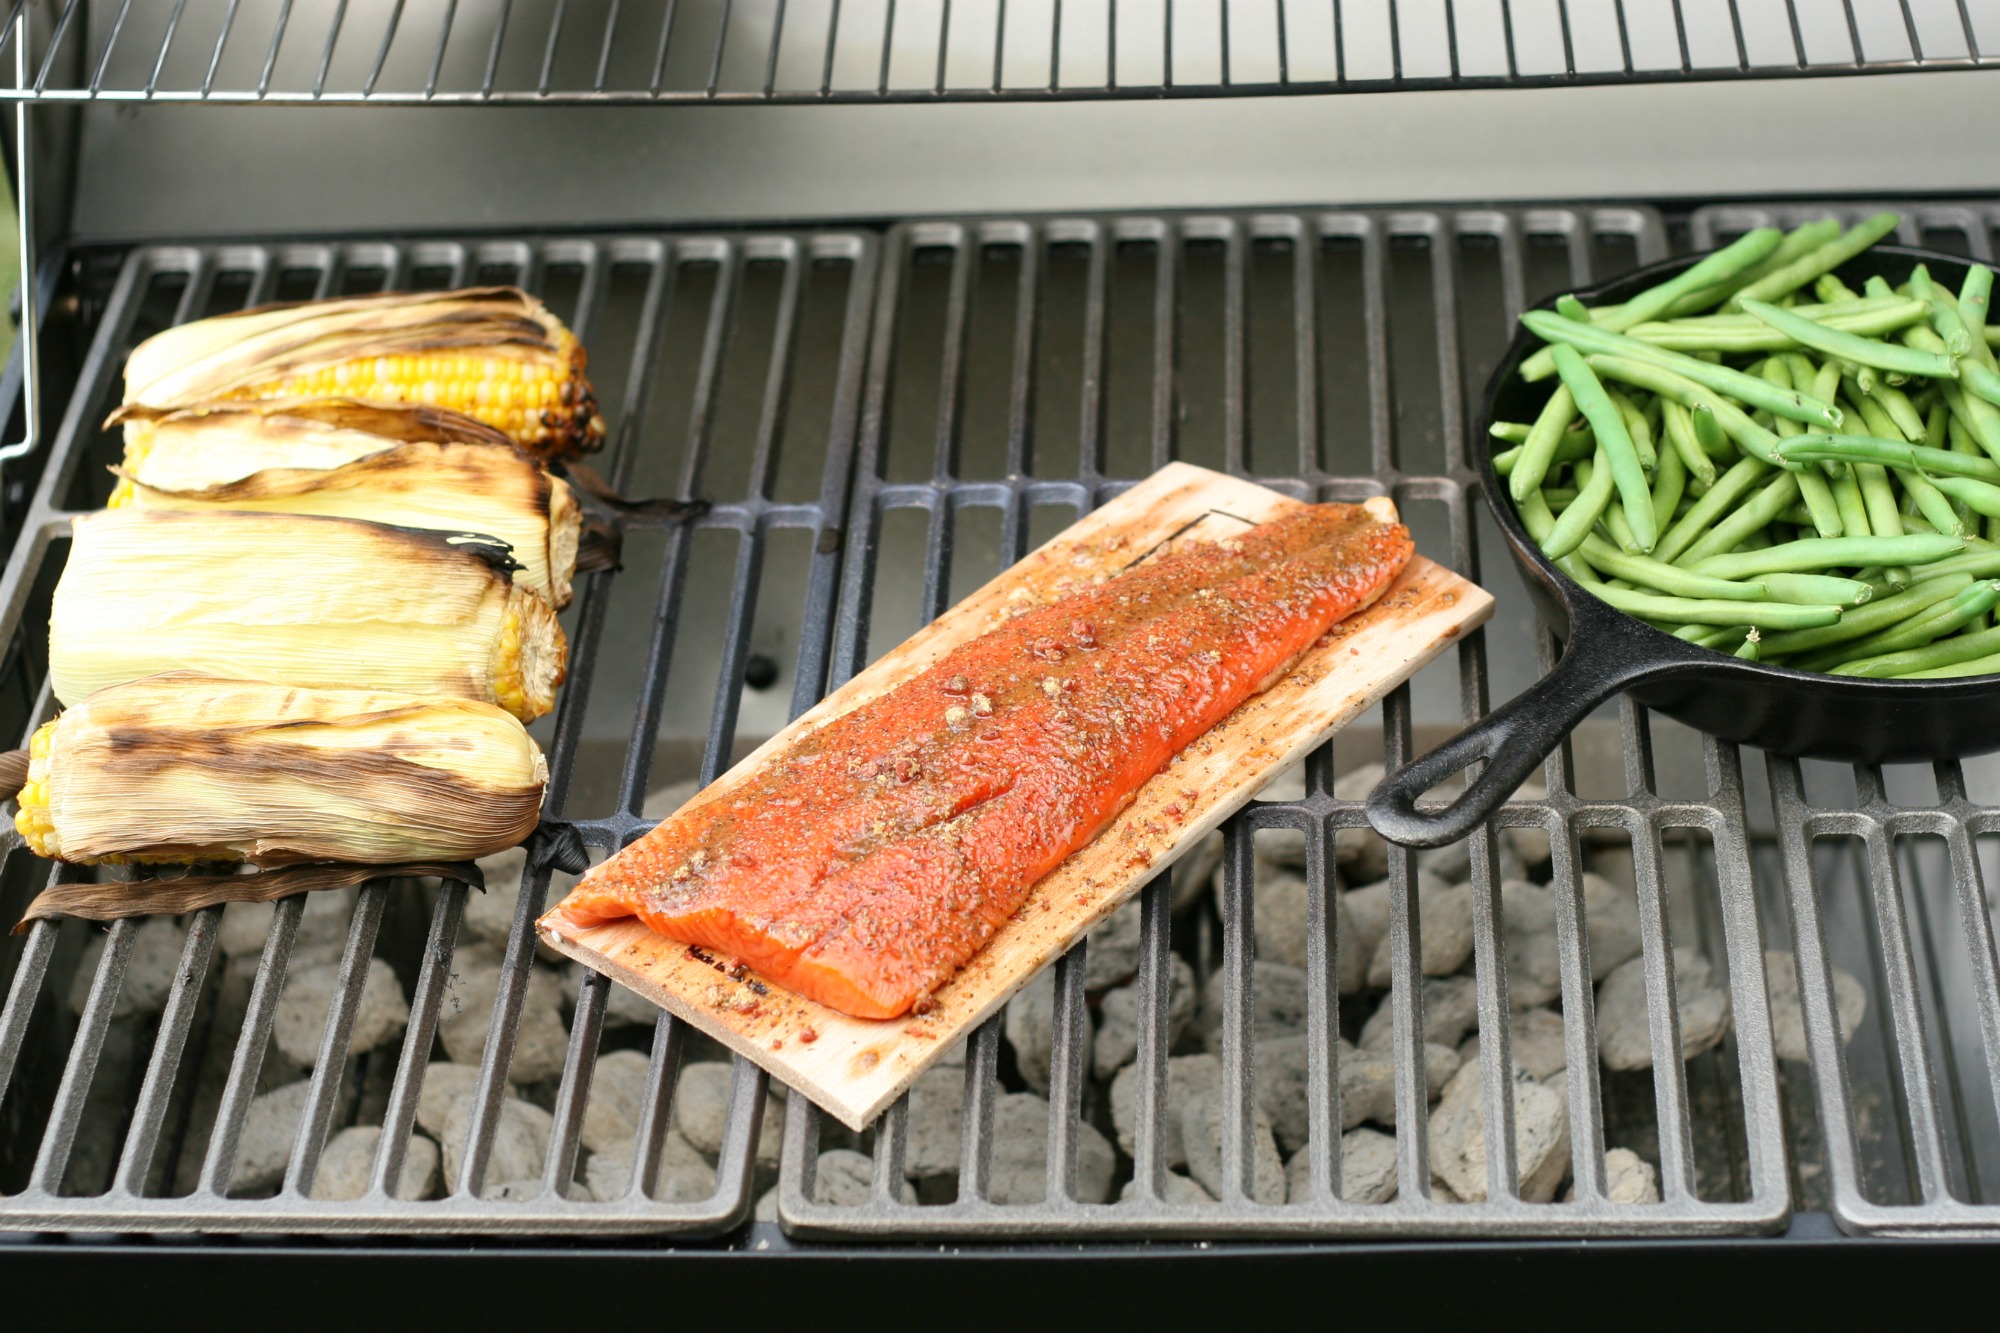 Wild Salmon from The Fresh Market on a maple wood plank on a charcoal grill.